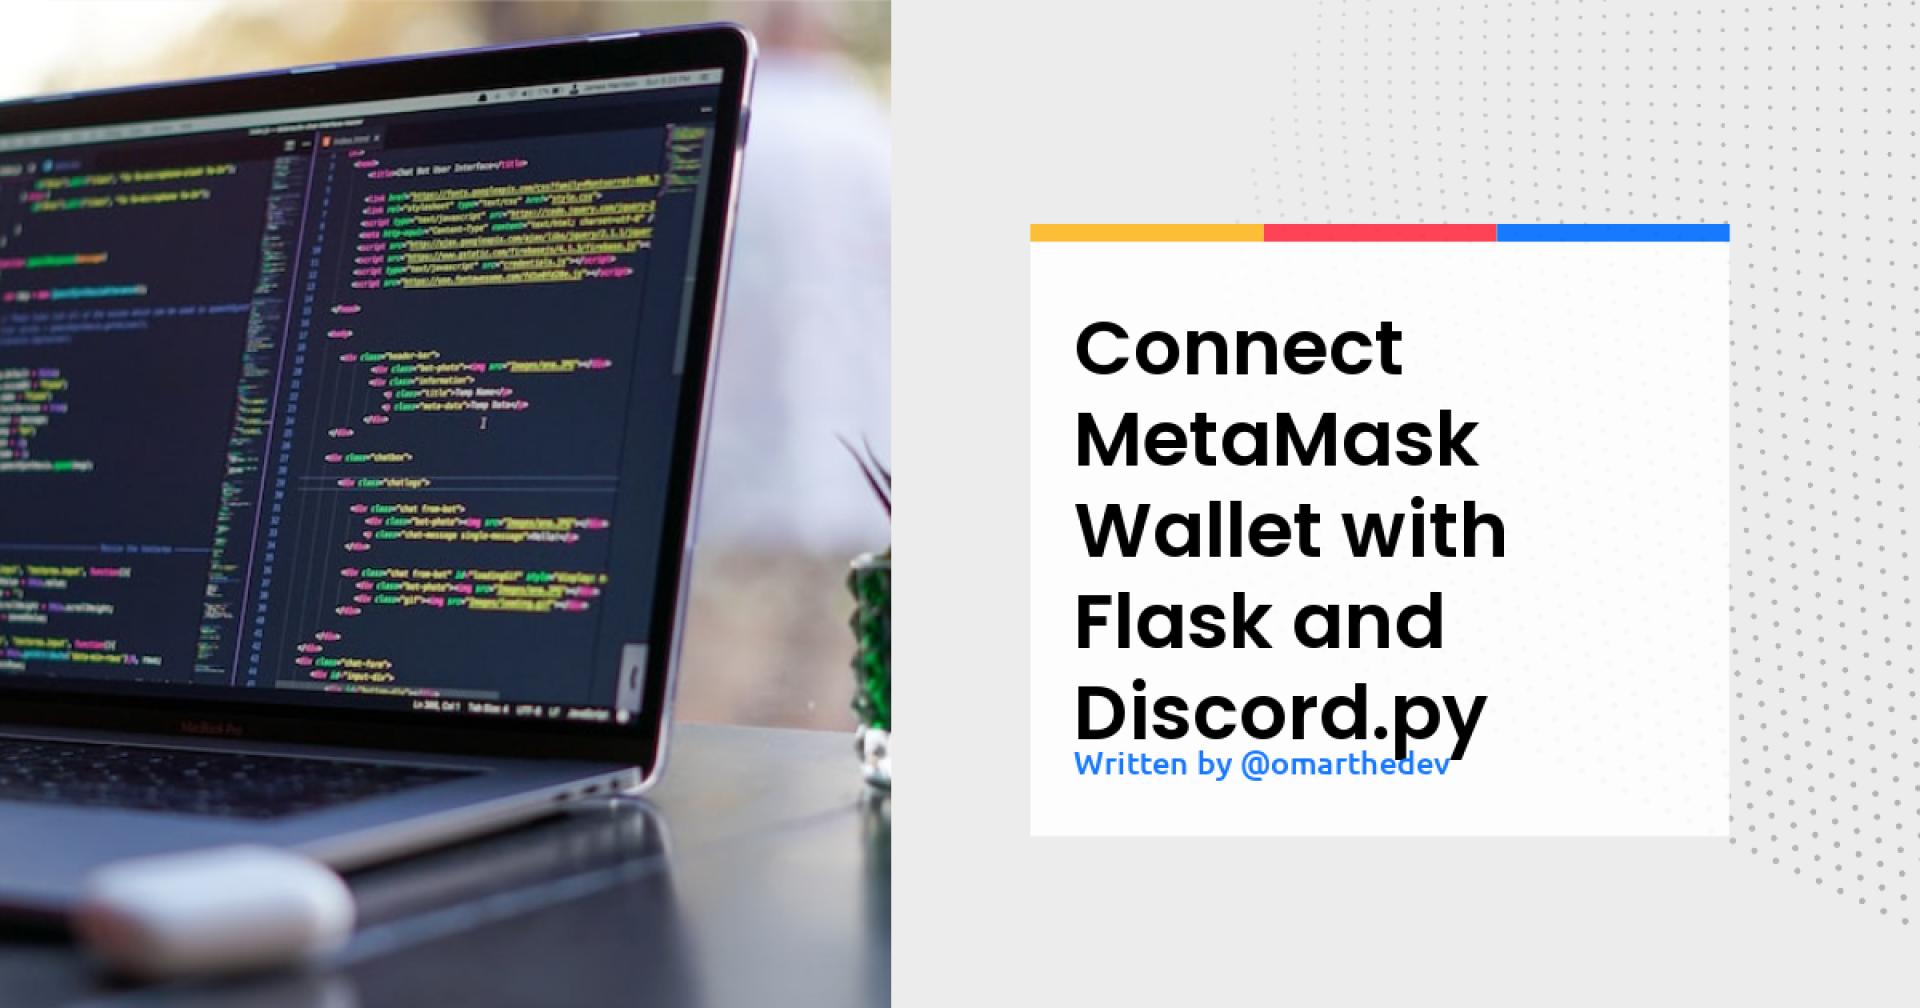 Connect MetaMask Wallet with Flask and Discord.py